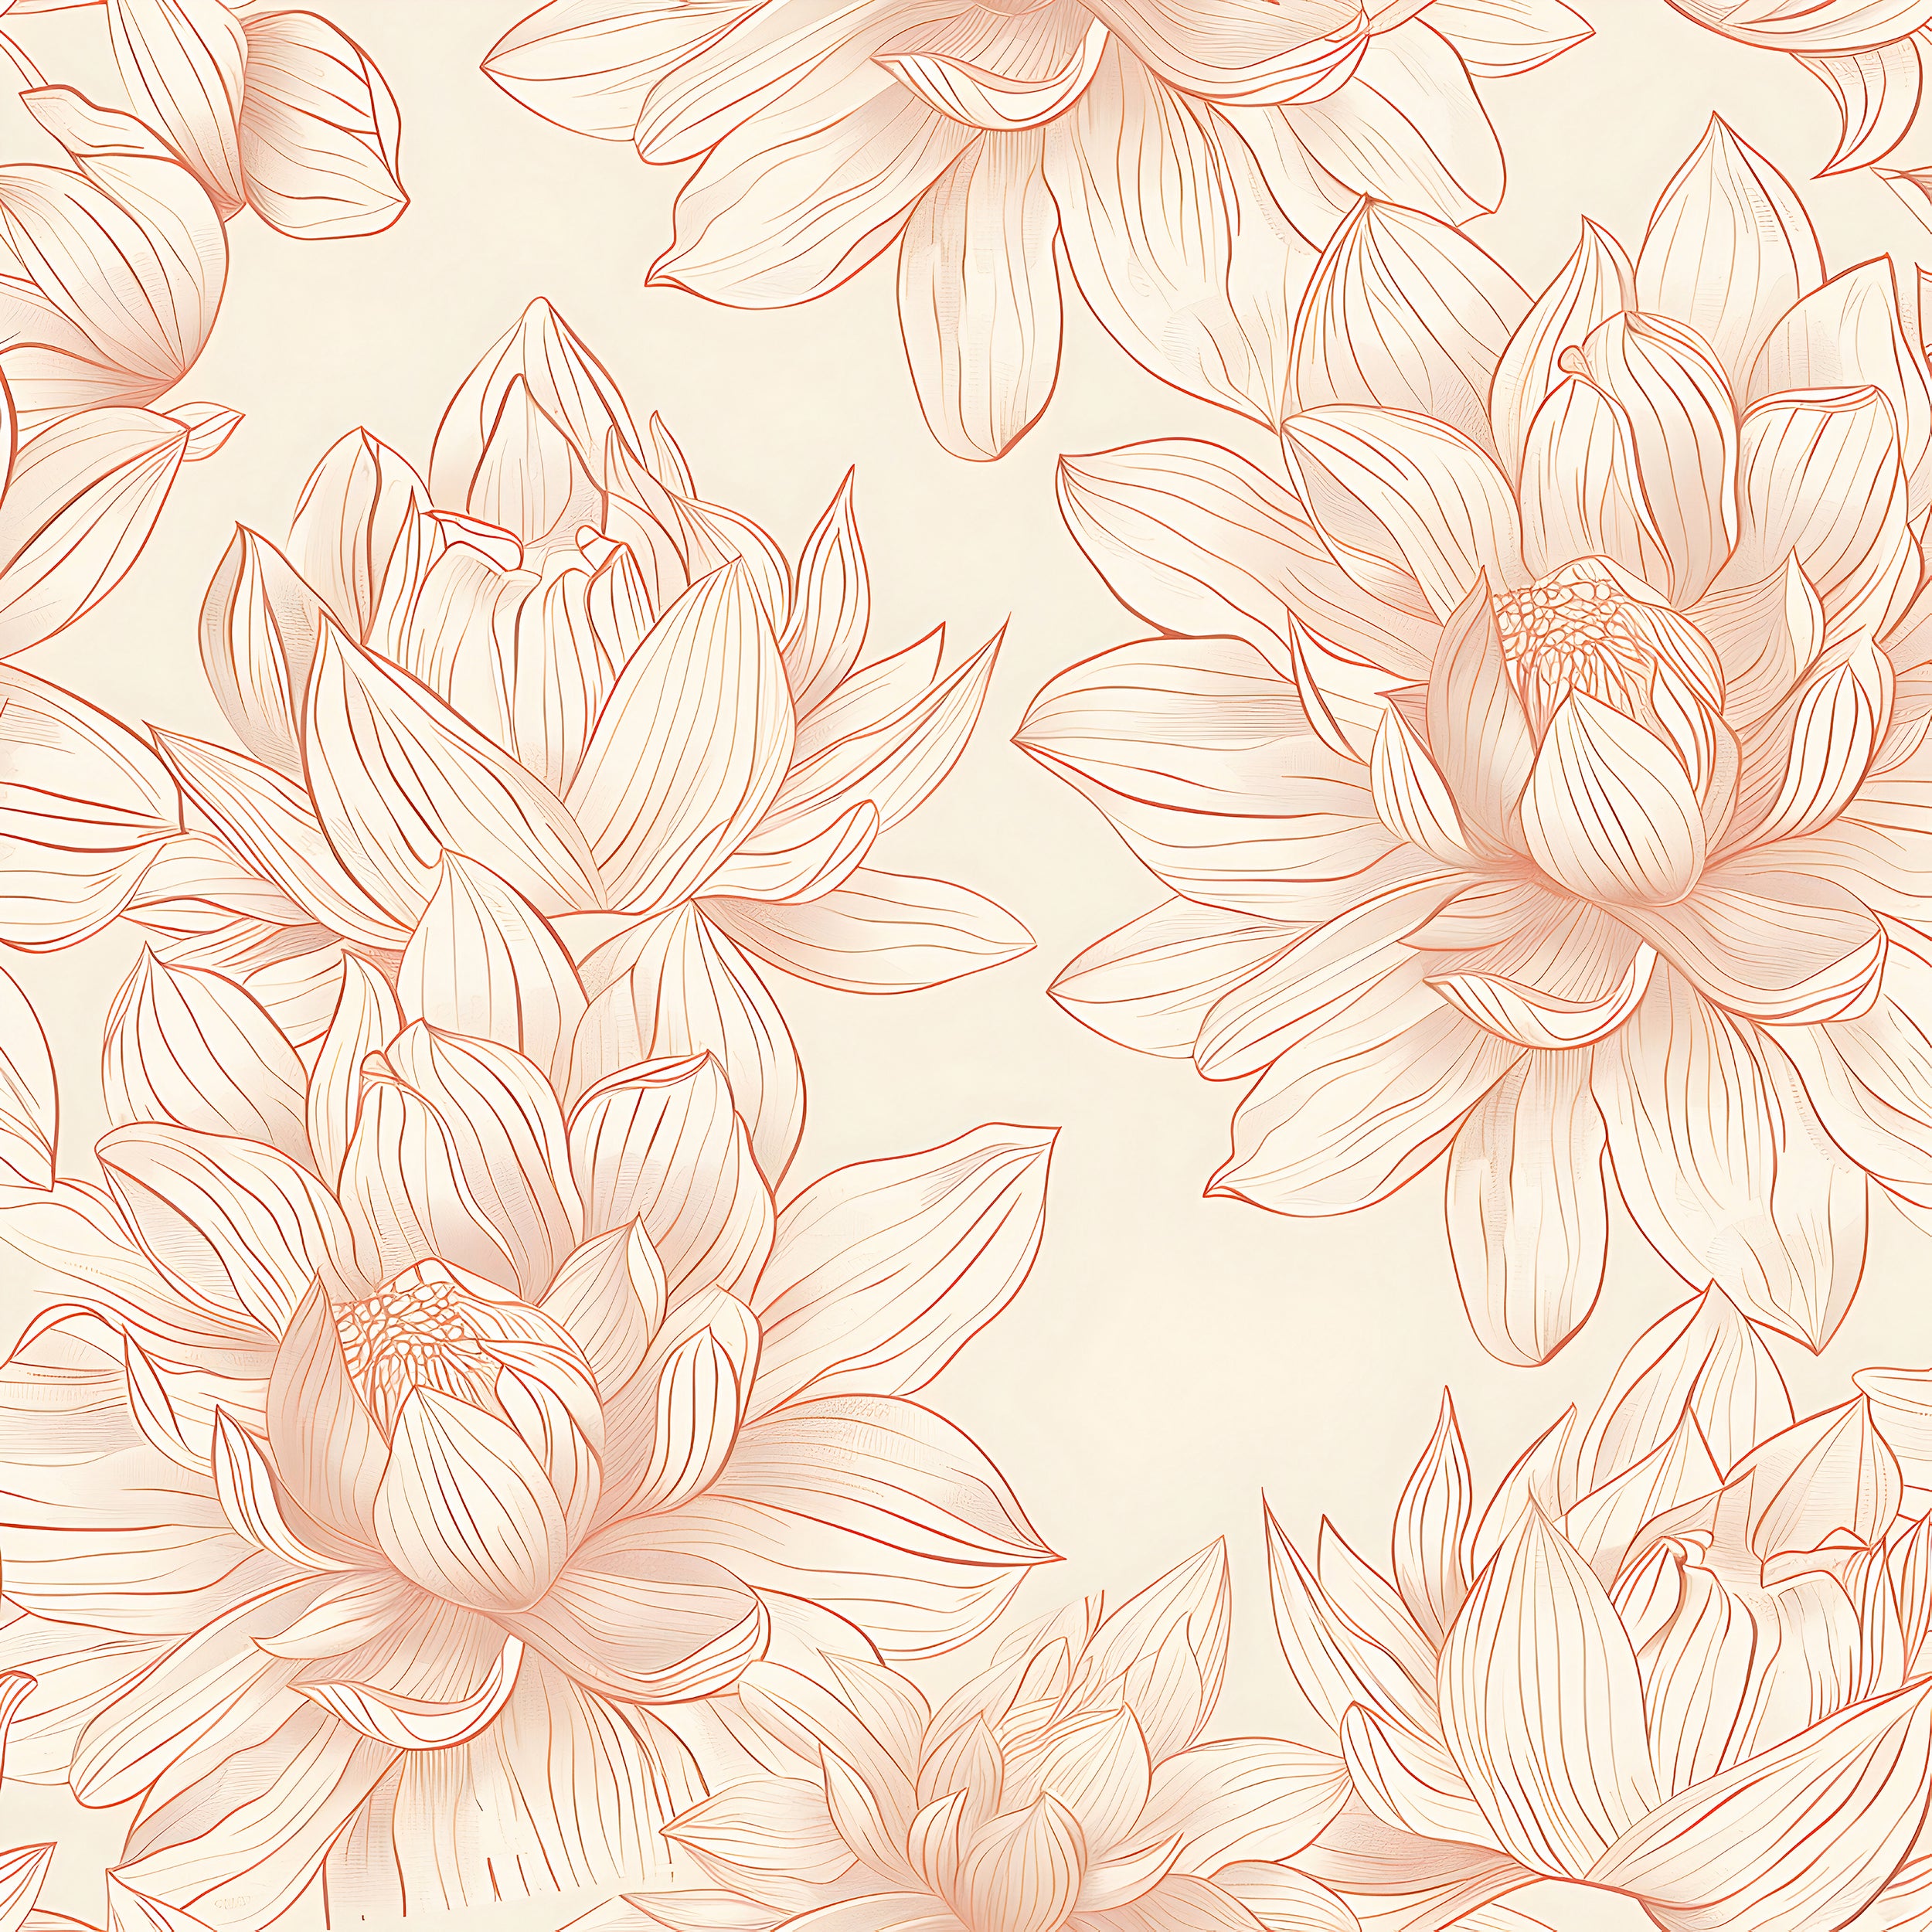 Lotus Flowers Wallpaper, Peel and Stick Pastel Colors Floral Wallpaper, Dusty Rose and Beige Botanical Wall Decor, Removable Flower Pattern Decal